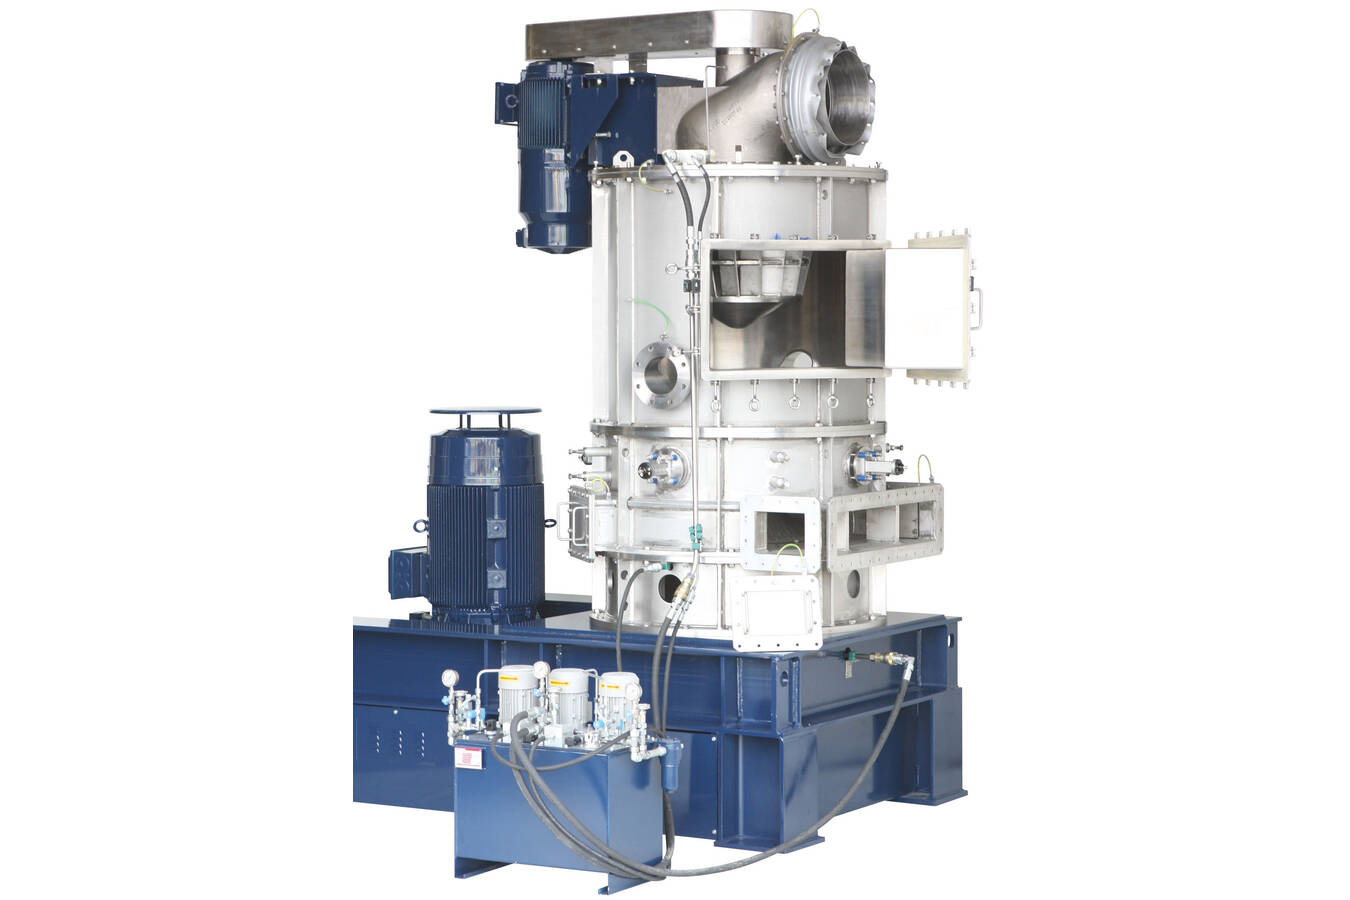 With Hosokawa Micron’s DMR Flash Grinding Dryer, drying, deagglomeration, grinding and classifying can be carried out in a single system. 